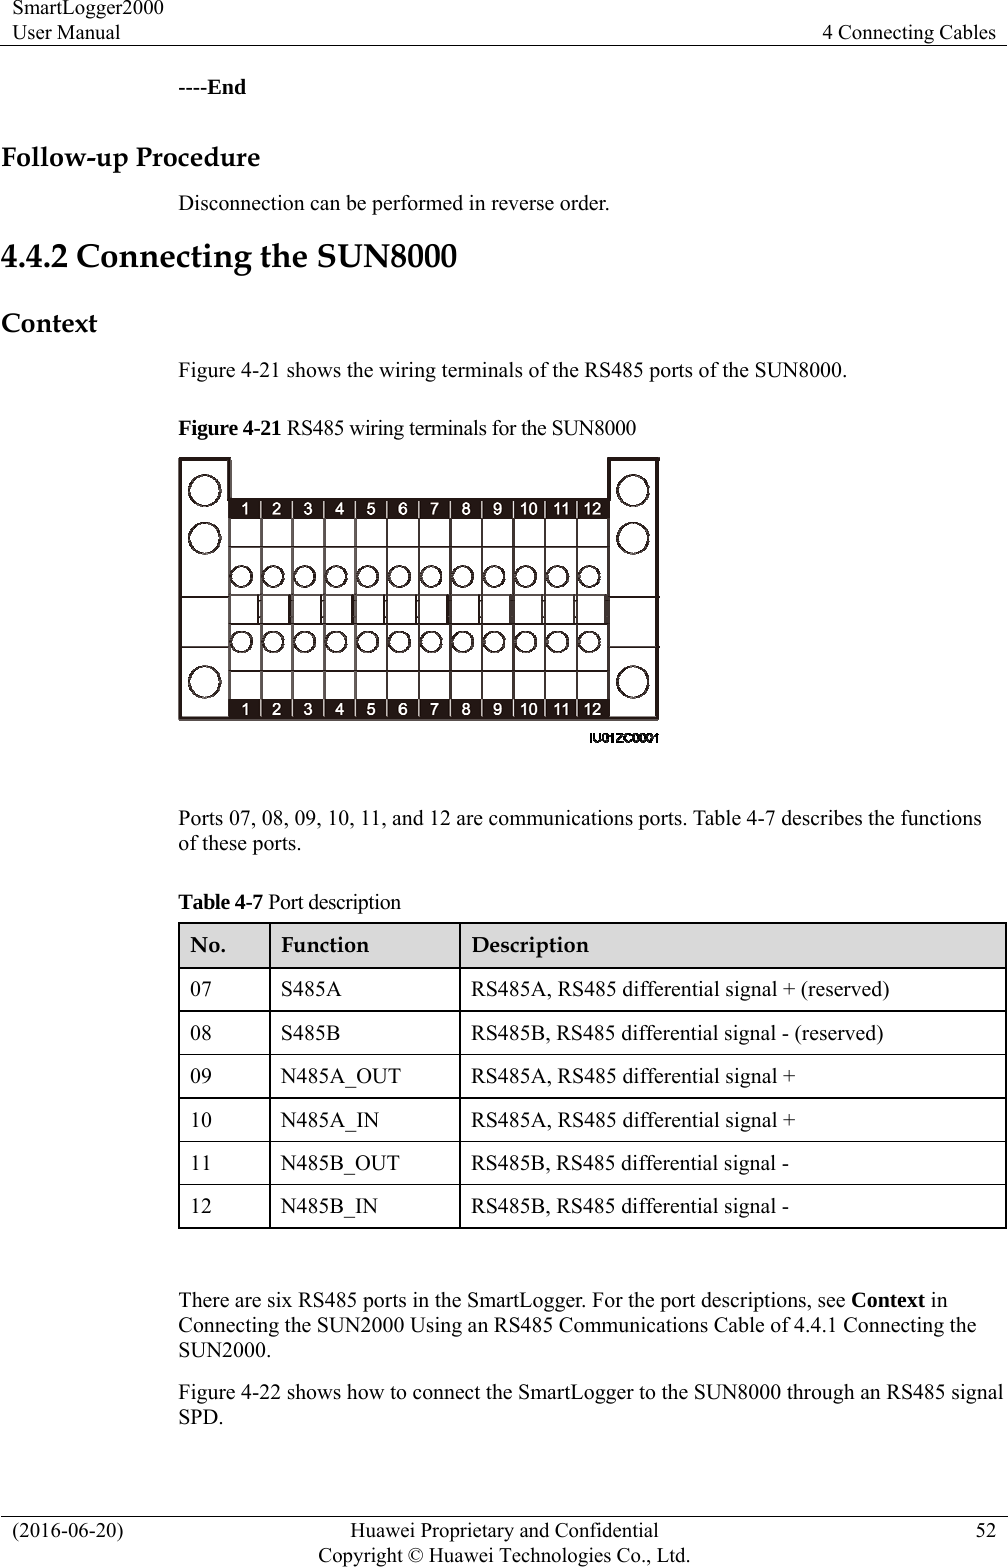 SmartLogger2000 User Manual  4 Connecting Cables (2016-06-20)  Huawei Proprietary and Confidential         Copyright © Huawei Technologies Co., Ltd.52 ----End Follow-up Procedure Disconnection can be performed in reverse order. 4.4.2 Connecting the SUN8000 Context Figure 4-21 shows the wiring terminals of the RS485 ports of the SUN8000. Figure 4-21 RS485 wiring terminals for the SUN8000   Ports 07, 08, 09, 10, 11, and 12 are communications ports. Table 4-7 describes the functions of these ports. Table 4-7 Port description No.  Function  Description 07  S485A  RS485A, RS485 differential signal + (reserved) 08  S485B  RS485B, RS485 differential signal - (reserved) 09  N485A_OUT  RS485A, RS485 differential signal + 10  N485A_IN  RS485A, RS485 differential signal + 11  N485B_OUT  RS485B, RS485 differential signal - 12  N485B_IN  RS485B, RS485 differential signal -  There are six RS485 ports in the SmartLogger. For the port descriptions, see Context in Connecting the SUN2000 Using an RS485 Communications Cable of 4.4.1 Connecting the SUN2000. Figure 4-22 shows how to connect the SmartLogger to the SUN8000 through an RS485 signal SPD. 